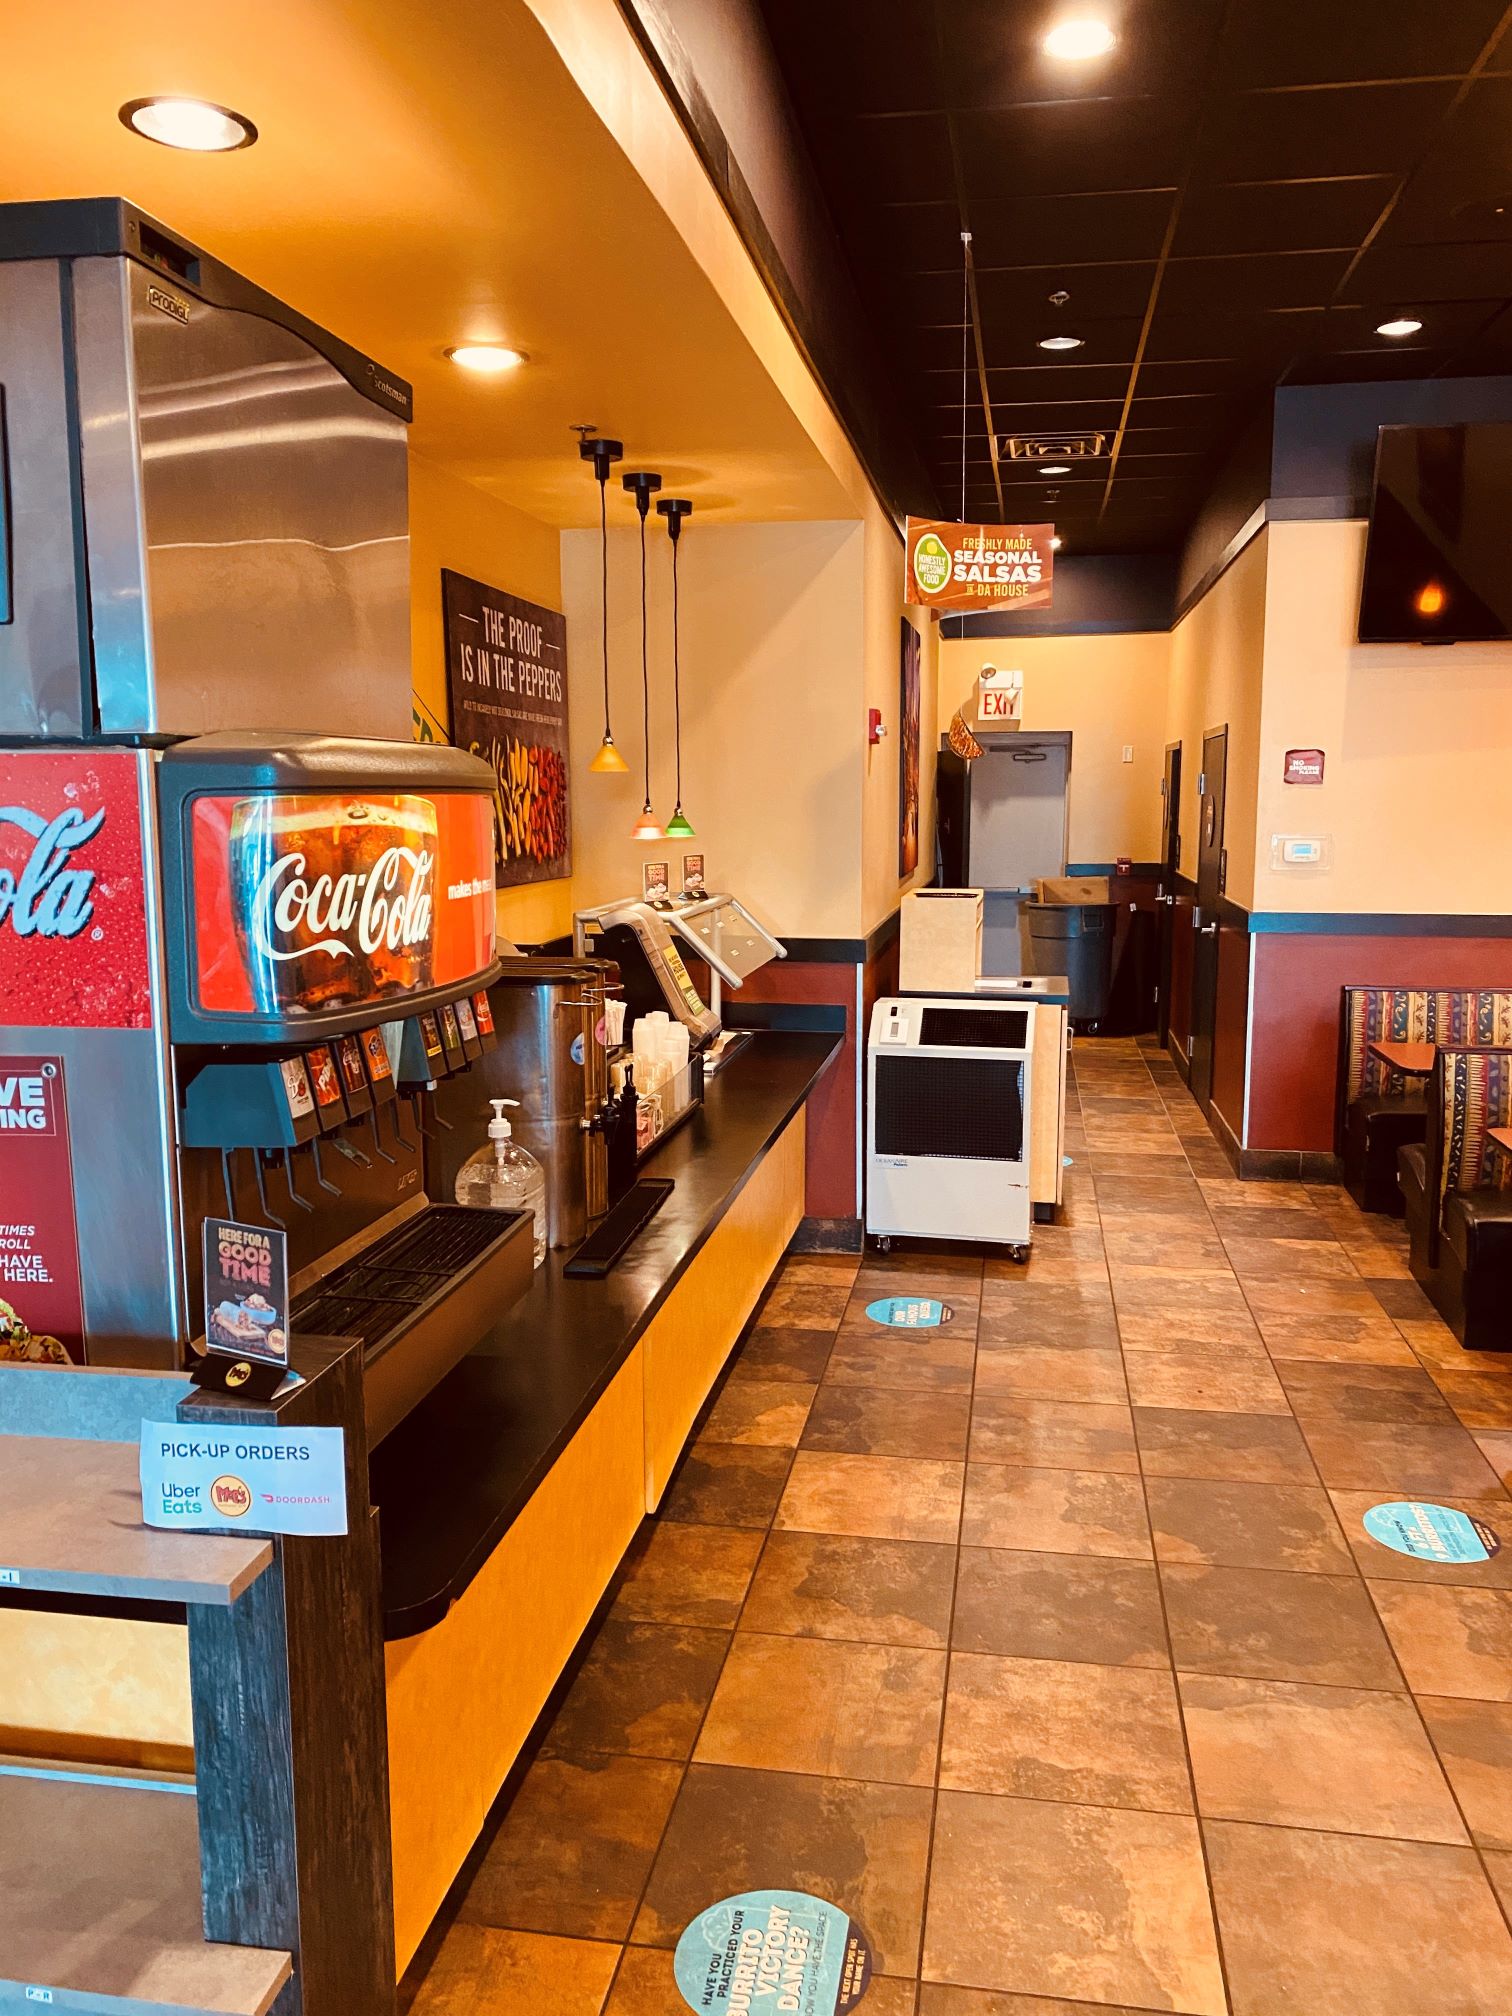 A fast-food restaurant with an air rental near the condiment counter spot cooling the area.  